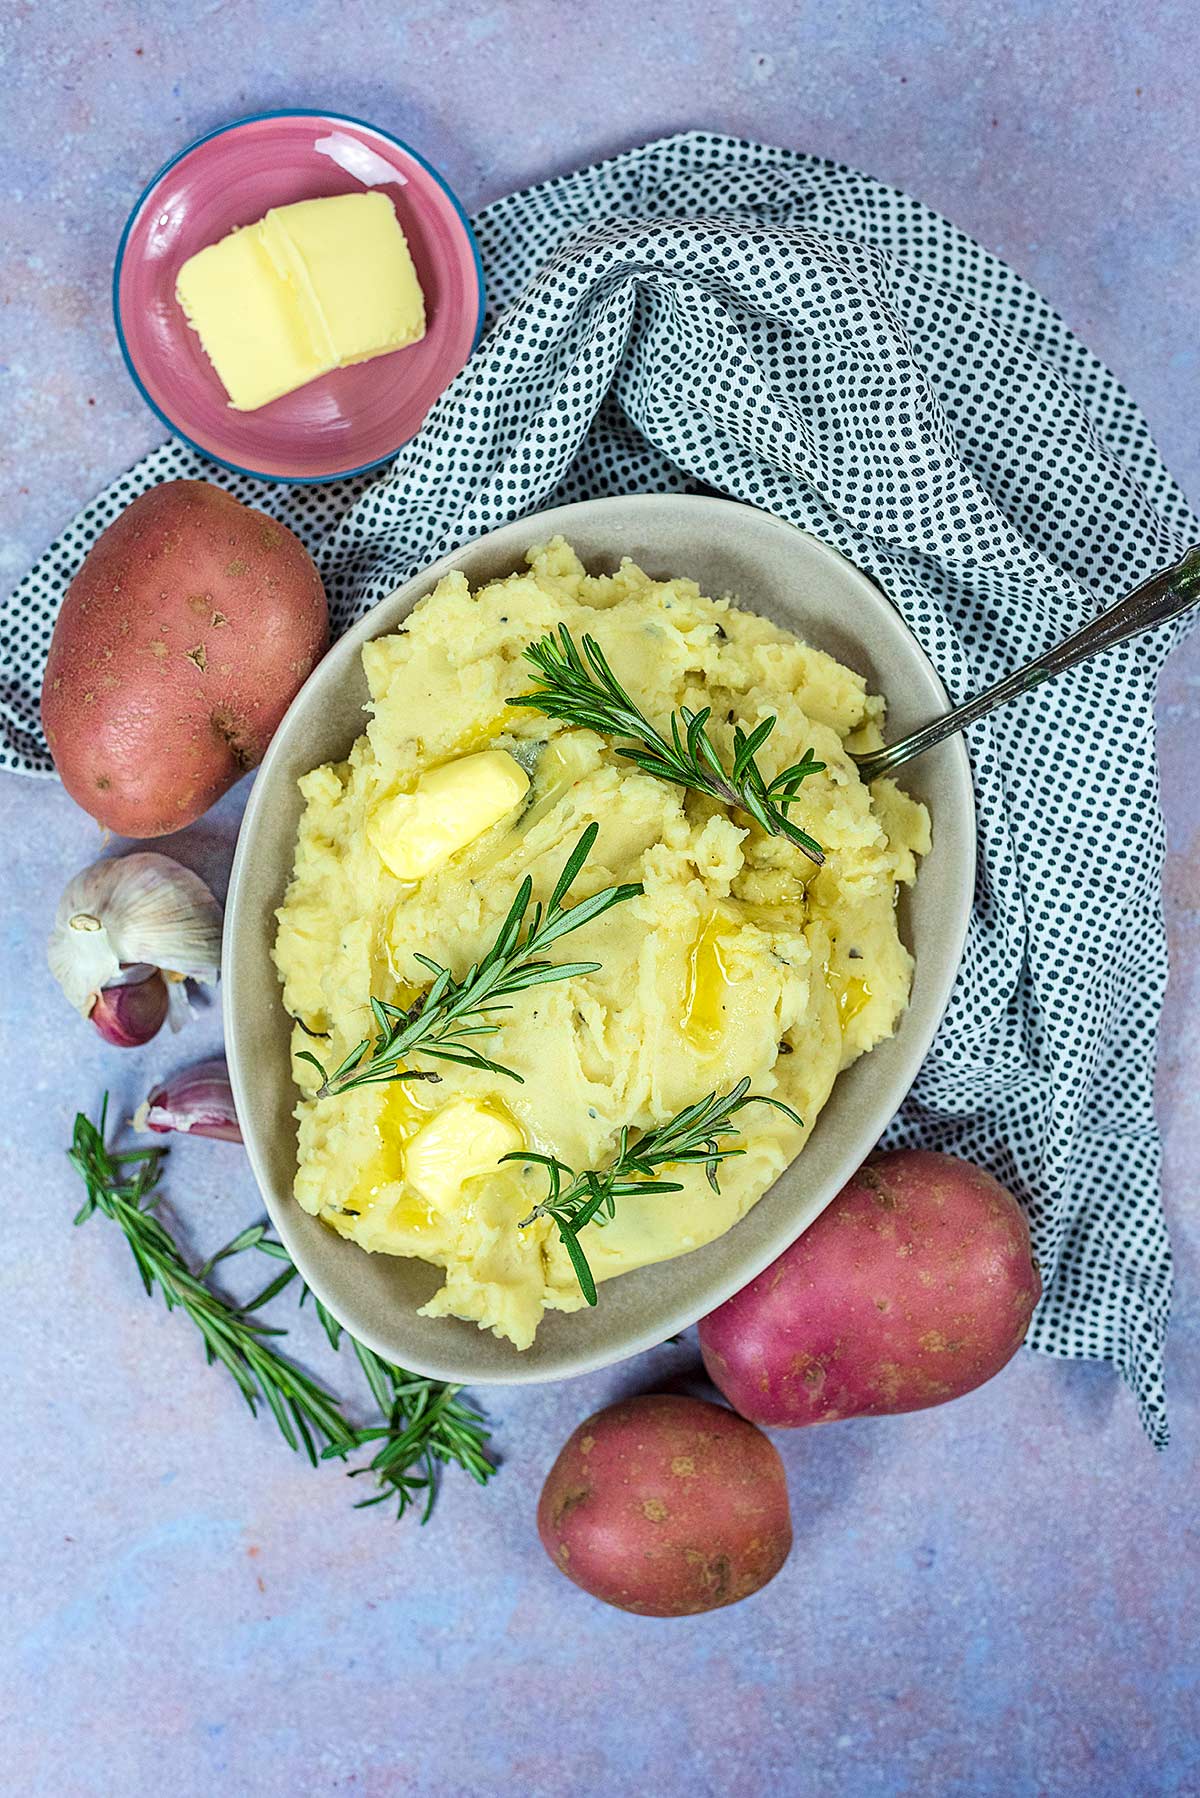 A bowl of mashed potato surrounded by whole potatoes, butter, garlic and rosemary.